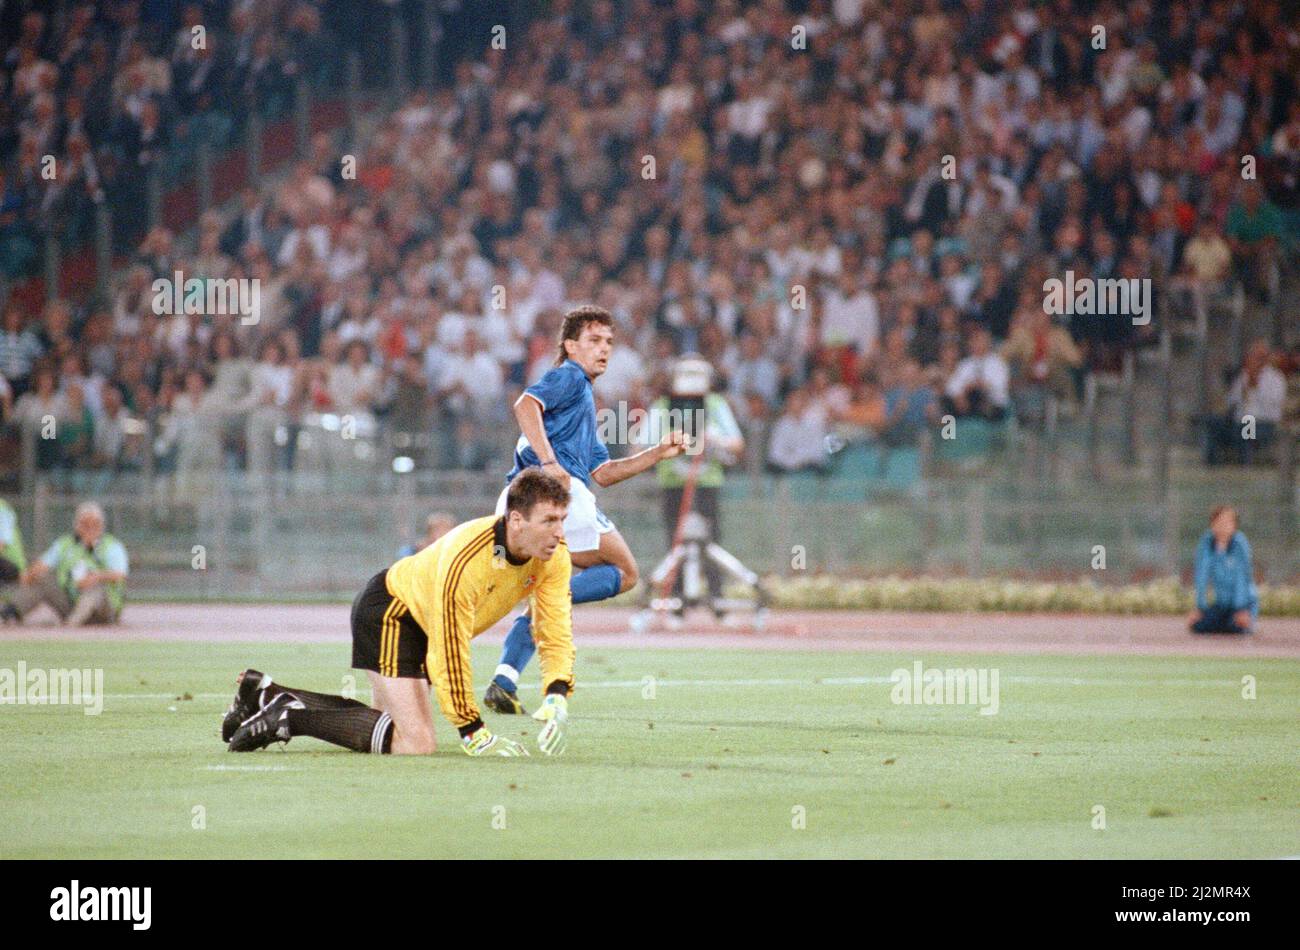 1990 World Cup Quarter Final at the Stadio Olimpico in  Rome, Italy. Republic of Ireland 0 v Italy 1. Roberto Baggio effort on goal watched by Pat Bonner. 30th June 1990. Stock Photo